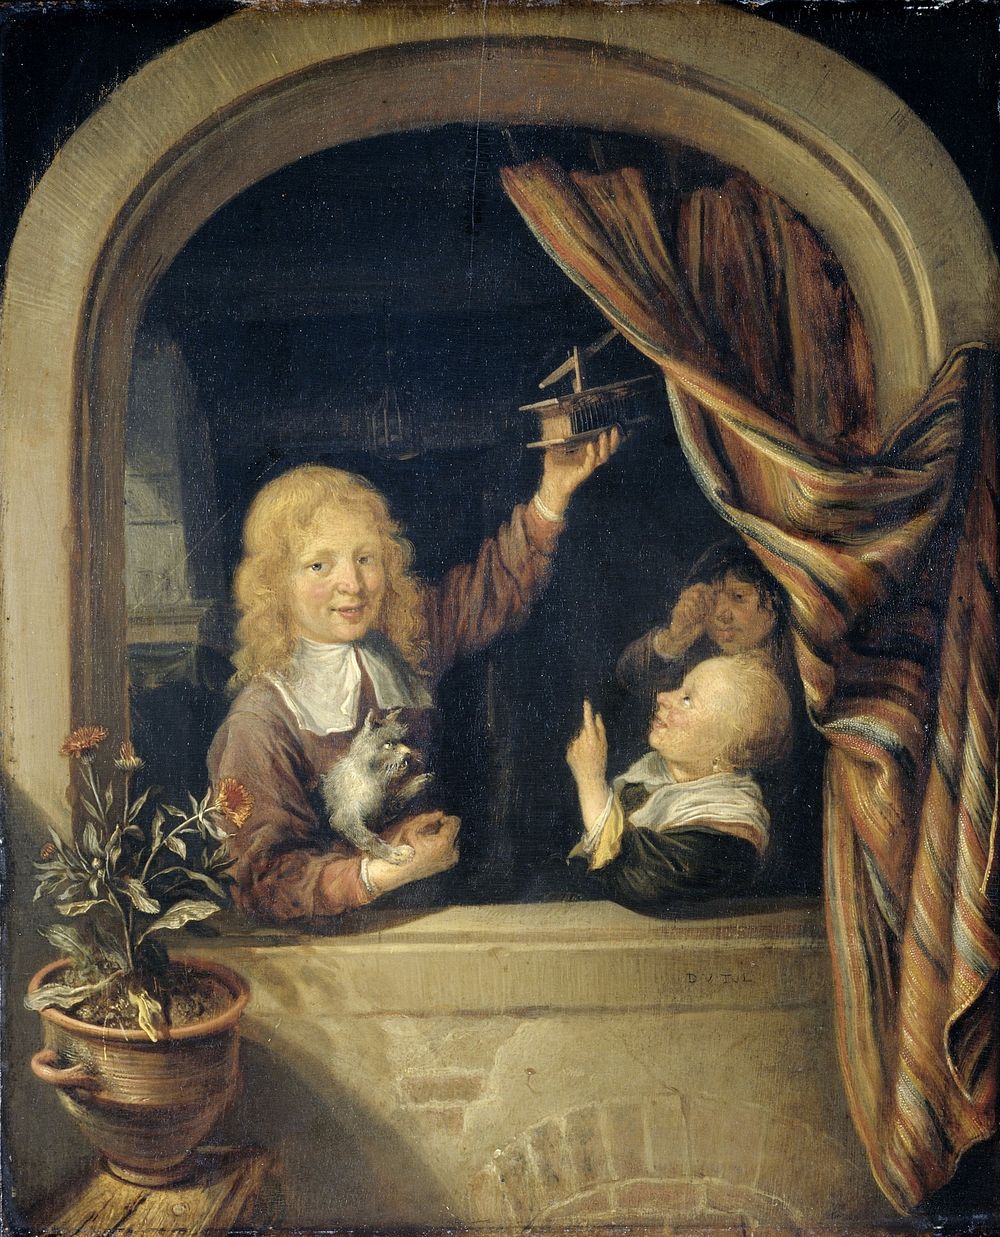 Children with a mousetrap (1660 - 1676) by Domenicus van Tol